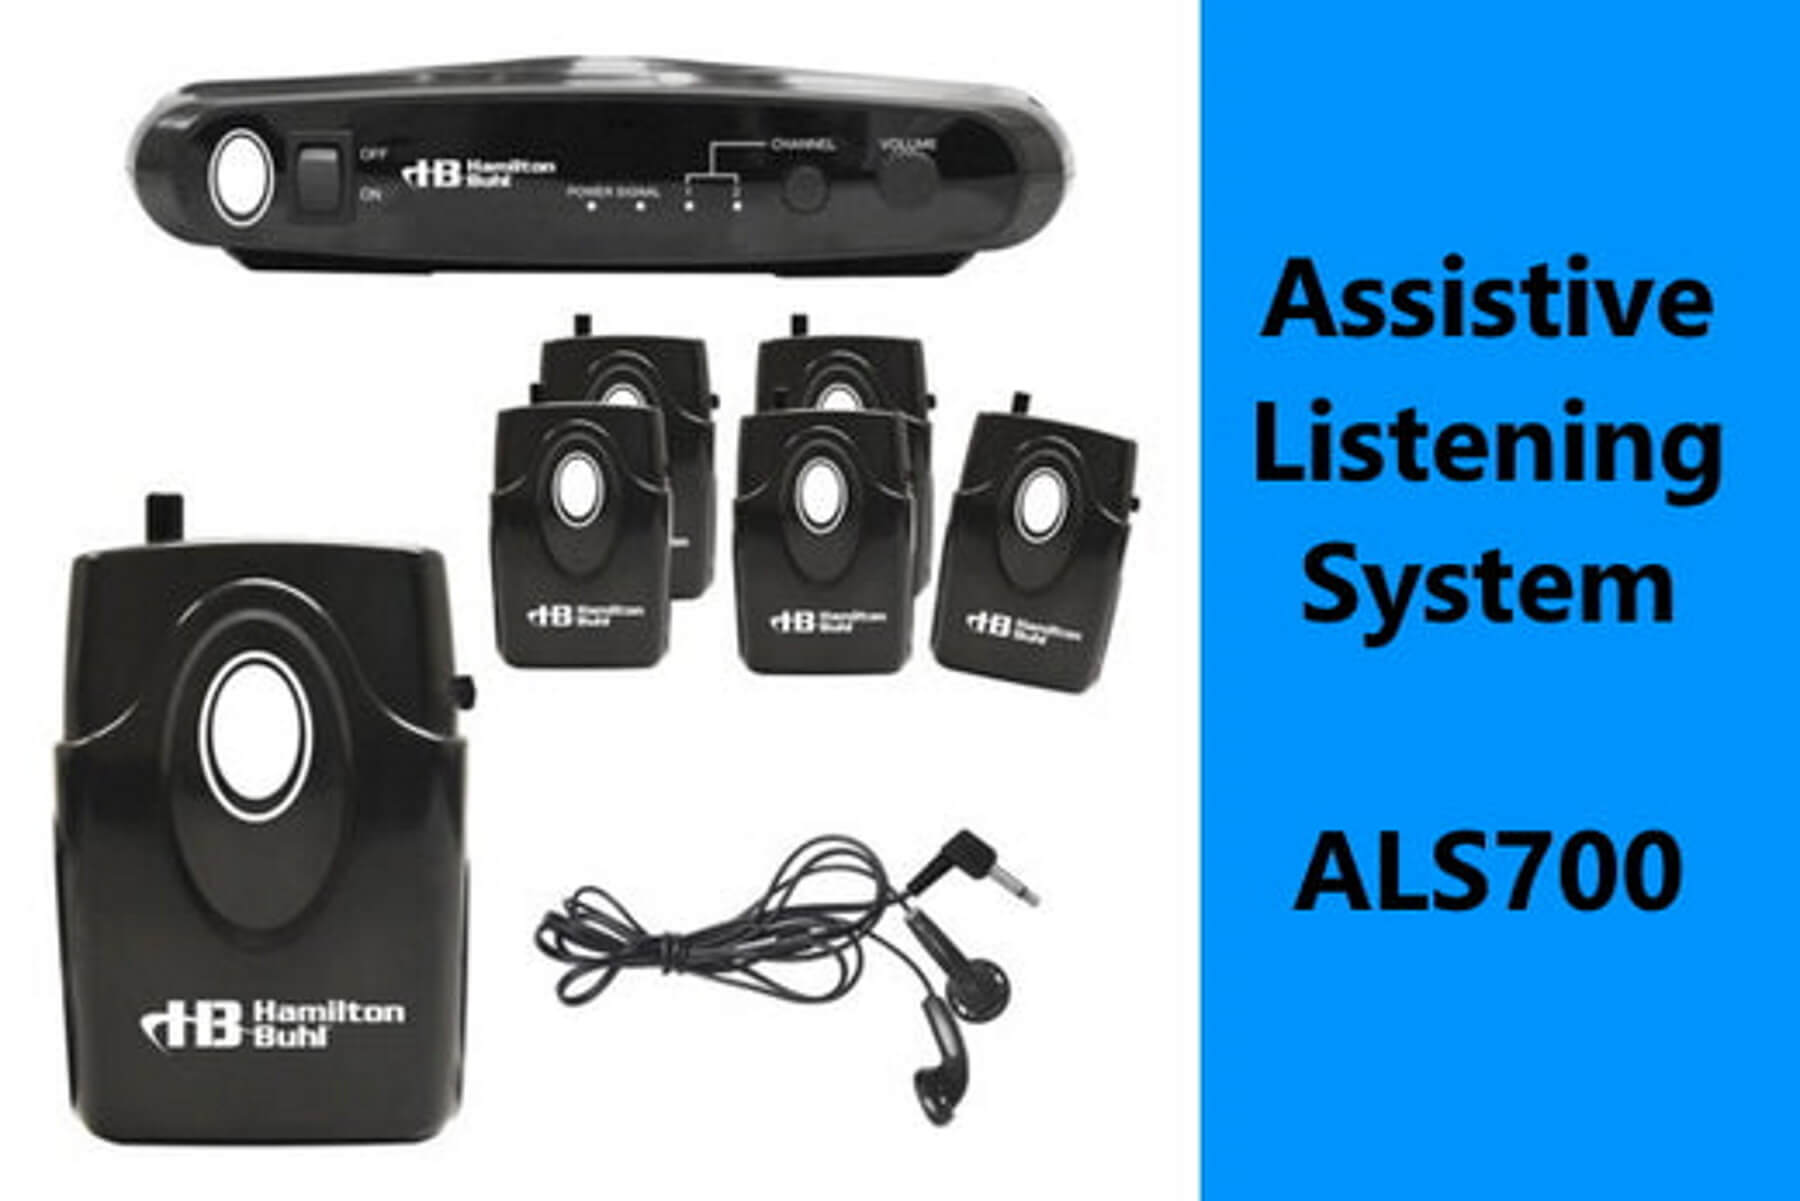 The ALS700 is a wireless assistive listening system that provides amplification and directionality to help make sound clearer, while reducing background noise.